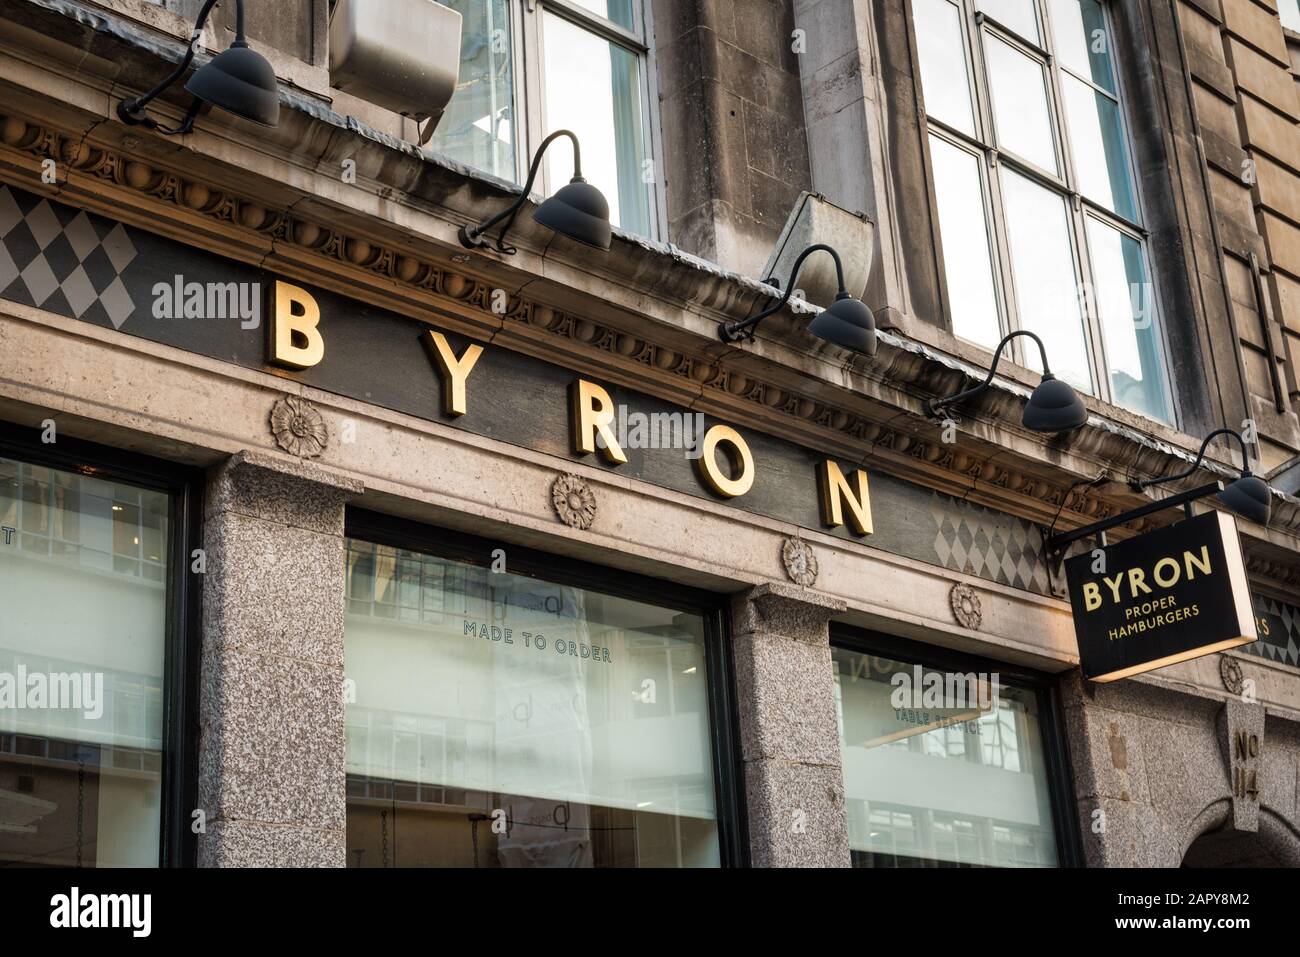 London, UK - Jan 17, 2020:  The front of the Bryon hamburger resturant in London Stock Photo